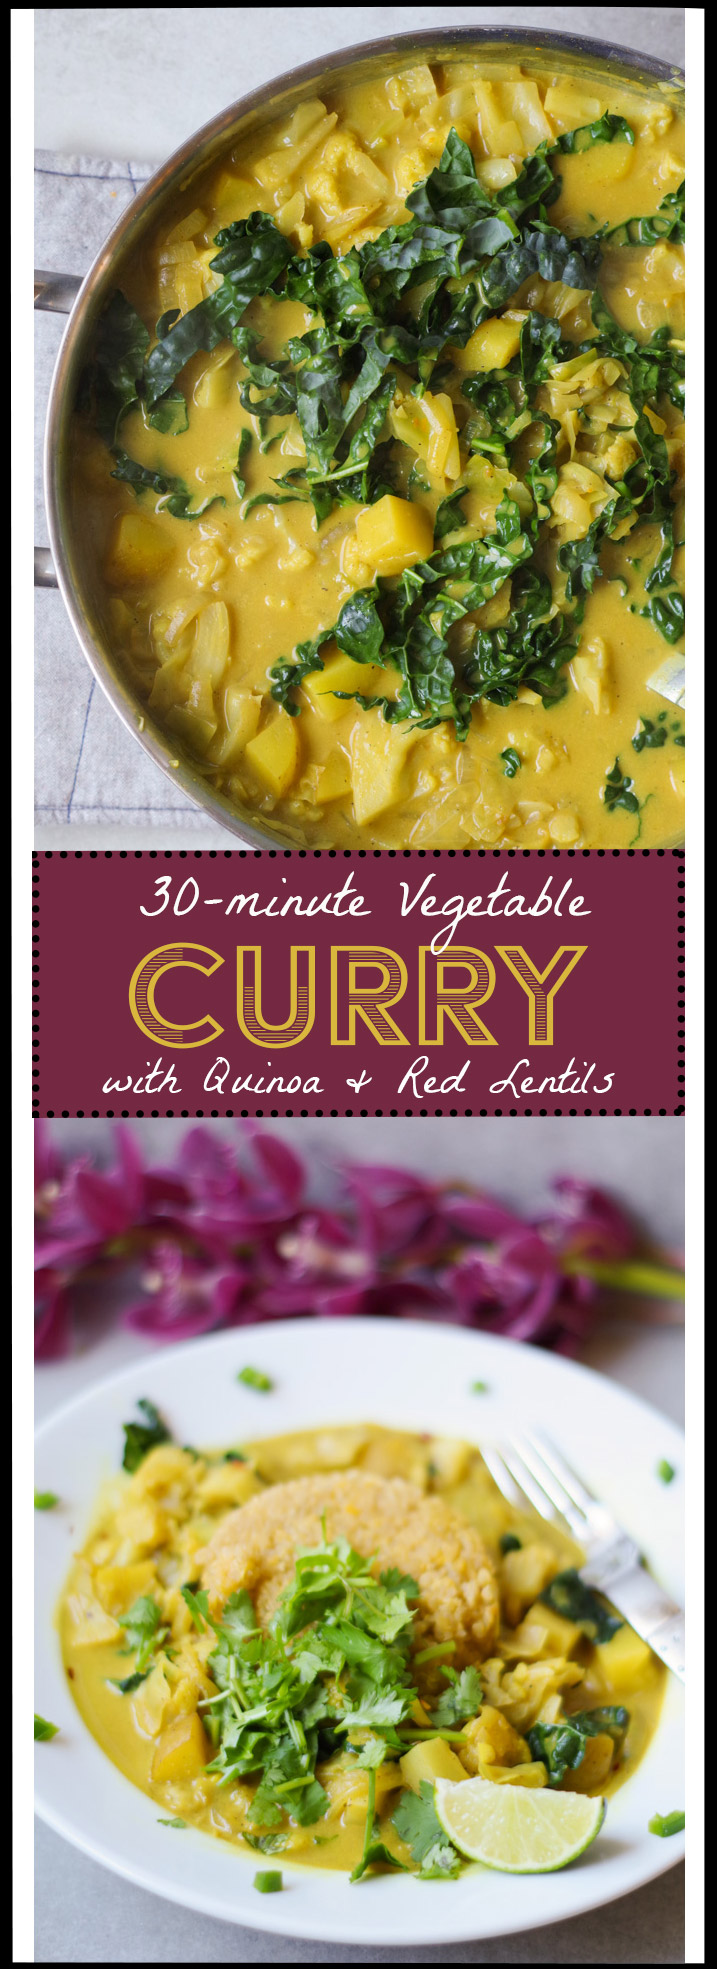 30-MINUTES VEGETABLE CURRY WITH QUINOA AND RED LENTILS, TOPPED WITH CILANTRO, LIME AND JALAPENOS. BY BEAUTIFUL INGREDIENT.